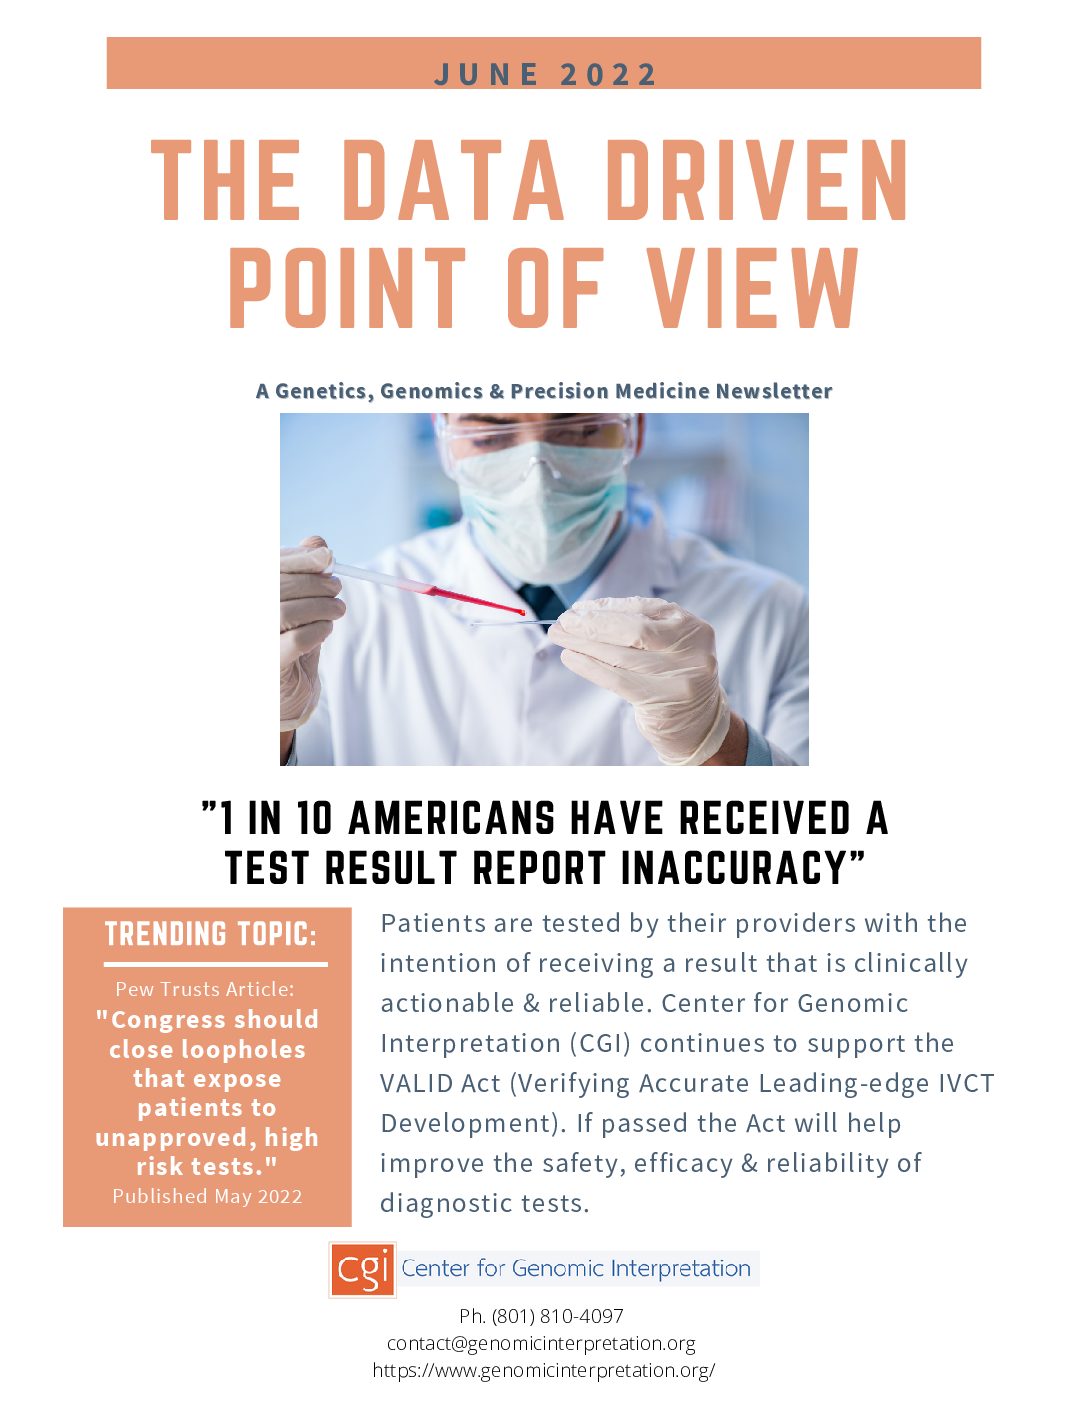 June 2022 – The Data Driven Point of View Newsletter:  “1 in 10 Americans Have Received a Test Result Report Inaccuracy”